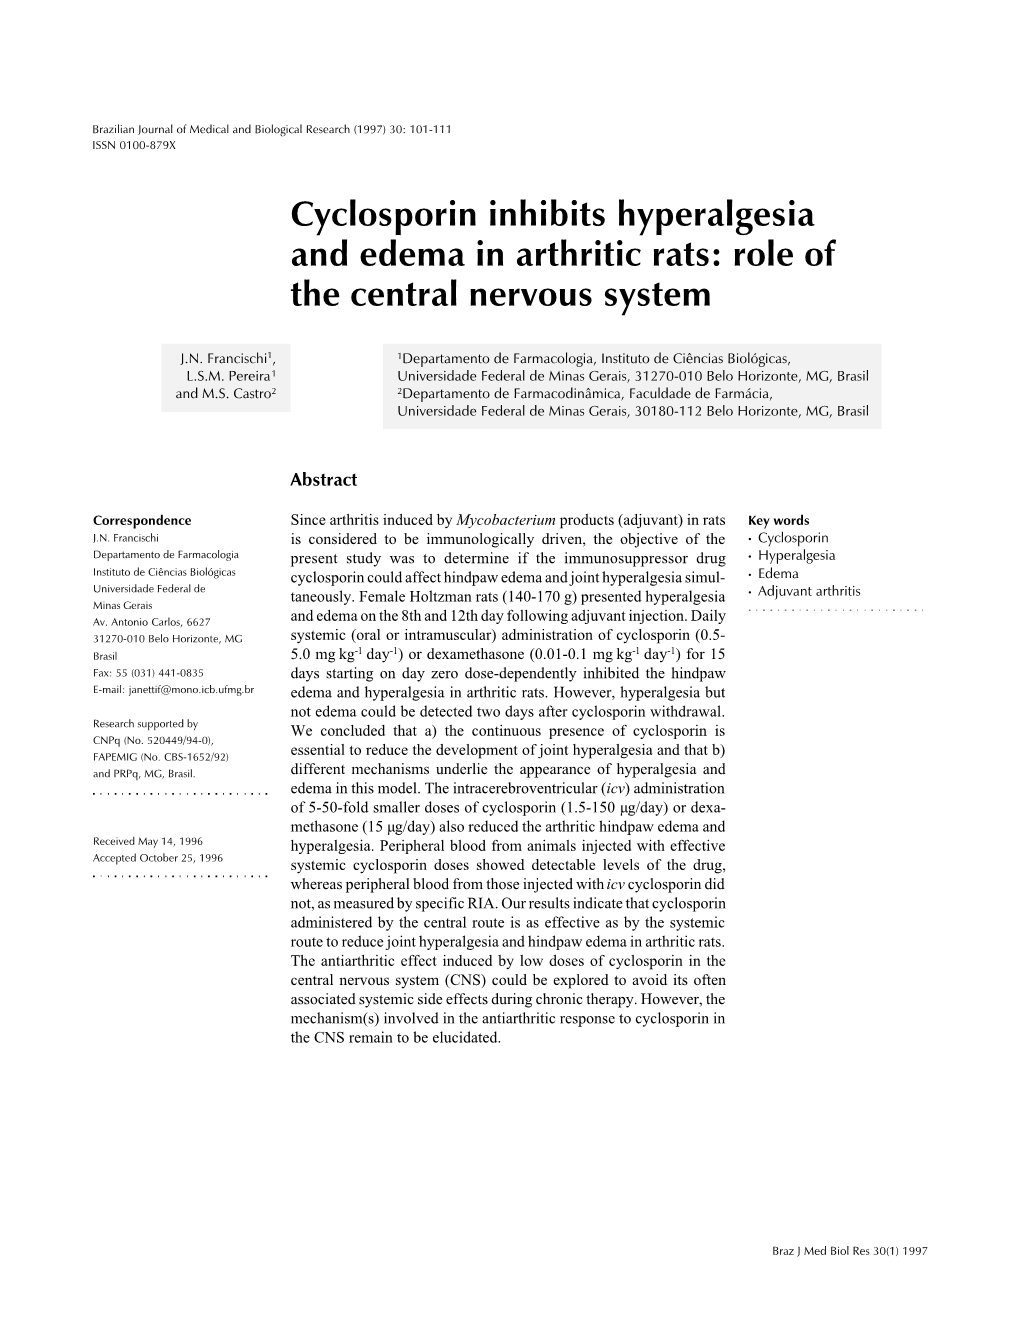 Cyclosporin Inhibits Hyperalgesia and Edema in Arthritic Rats: Role of the Central Nervous System